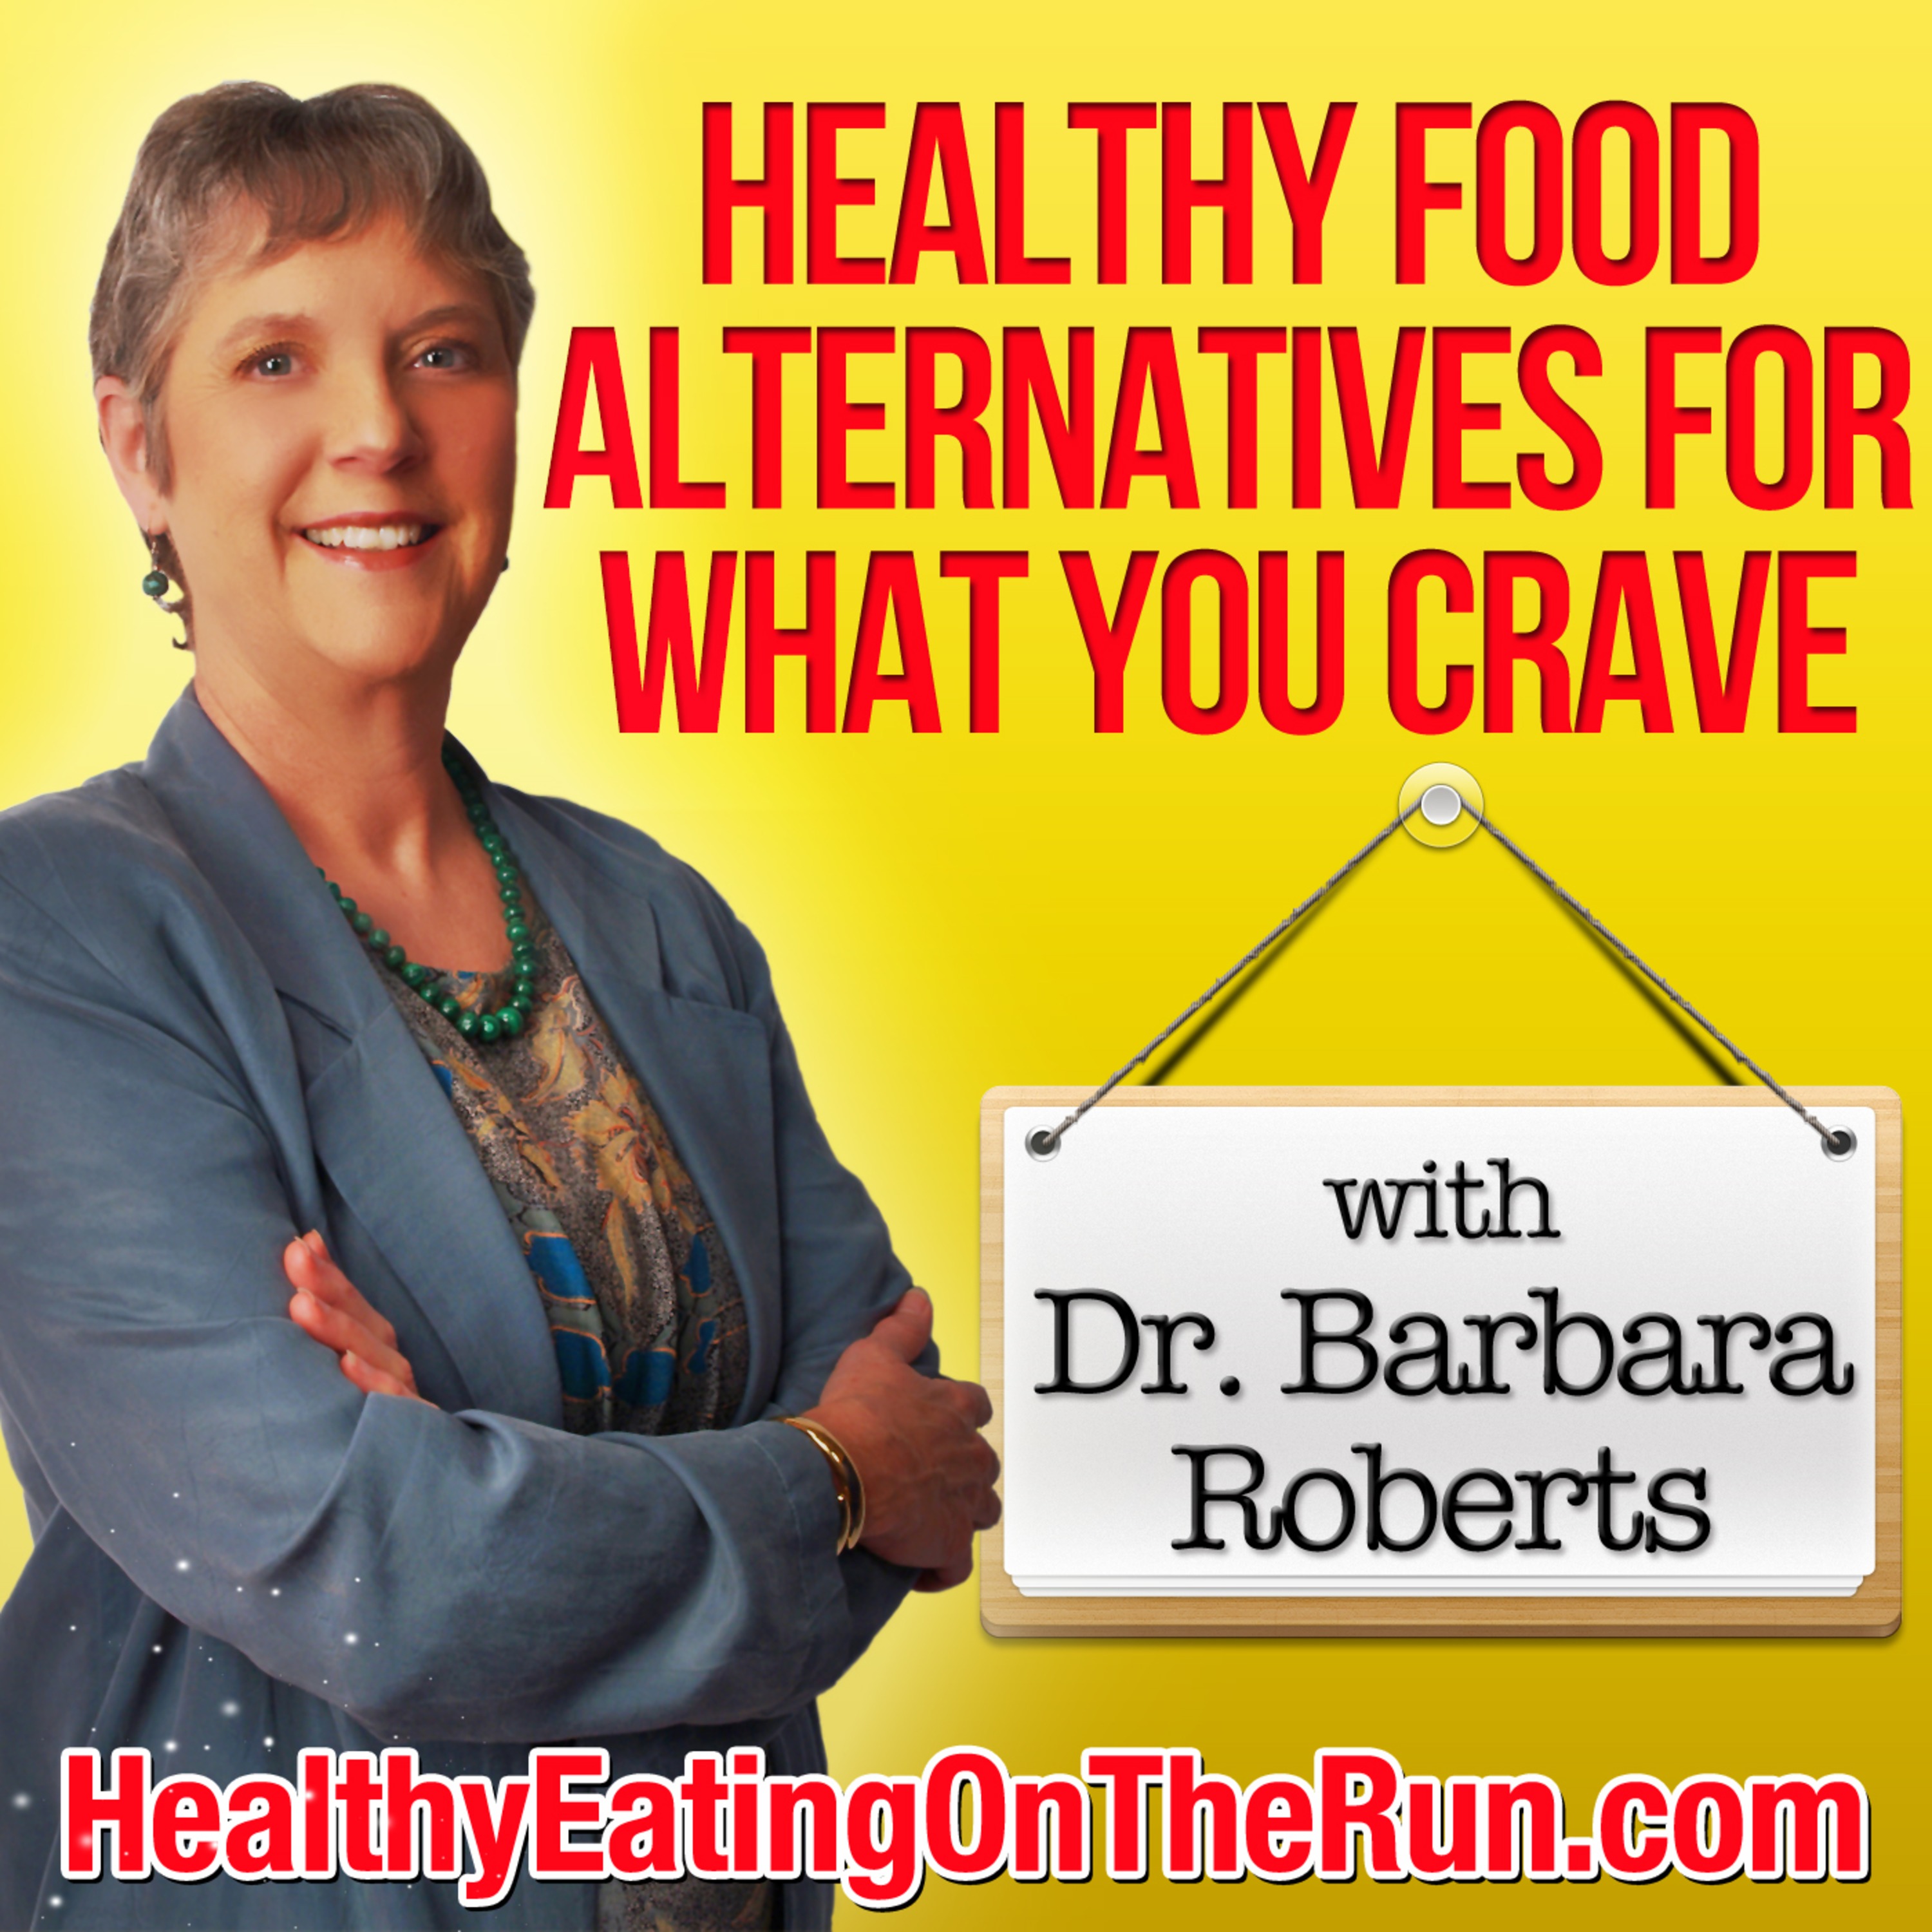 Healthy Food Alternatives for What You Crave